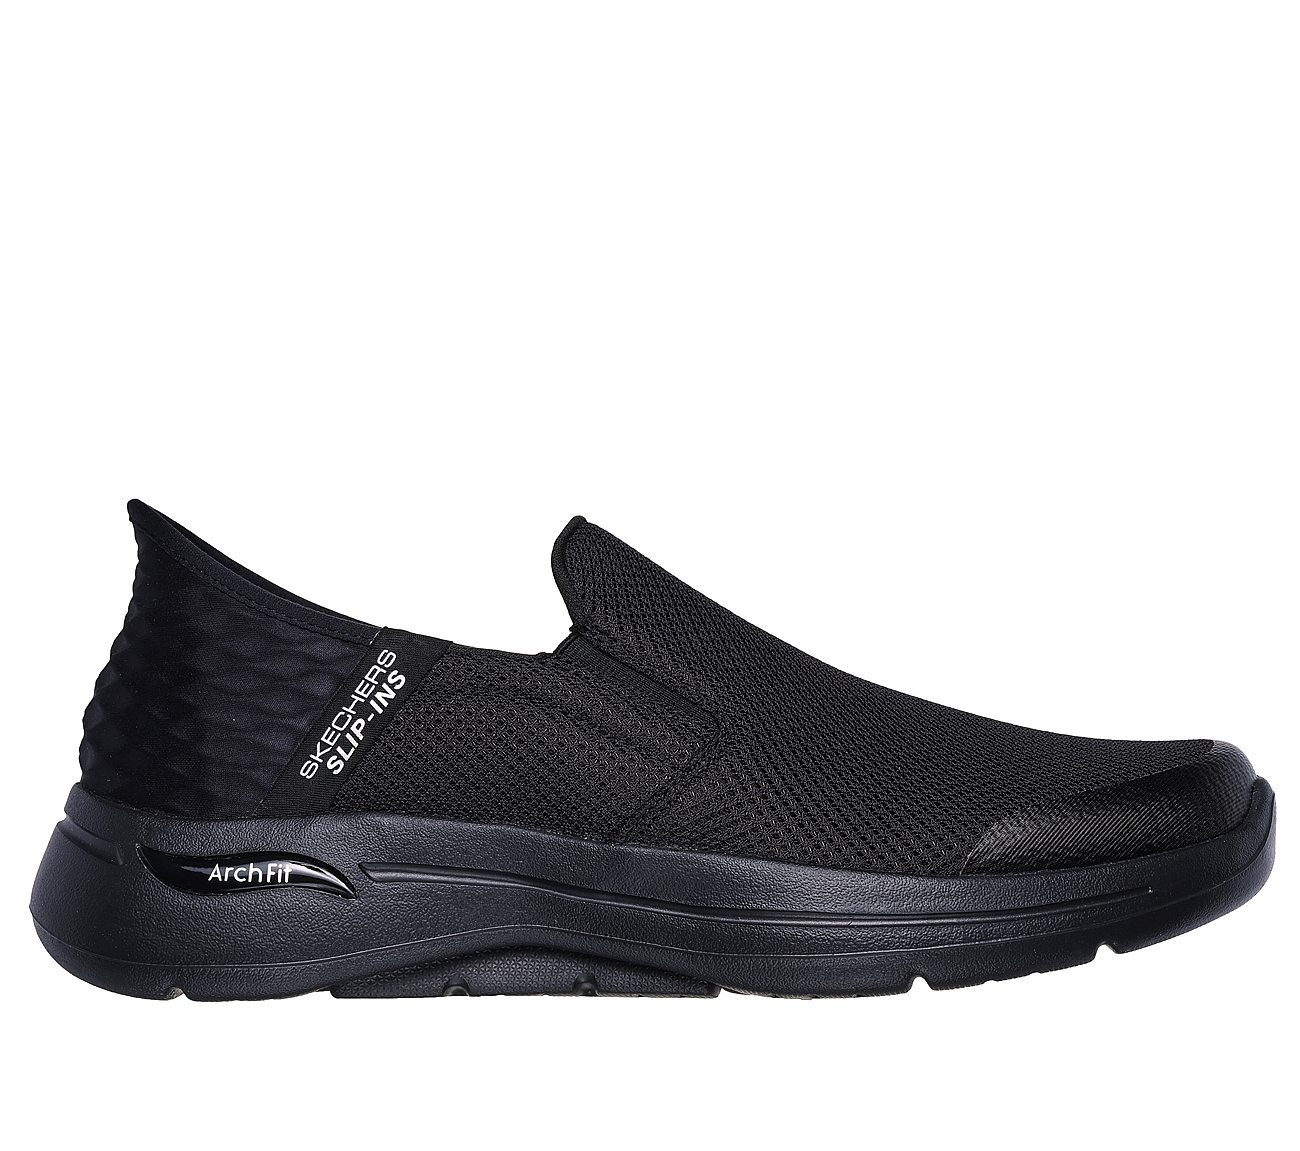 GO WALK ARCH FIT - HANDS FREE, BBLACK Footwear Lateral View